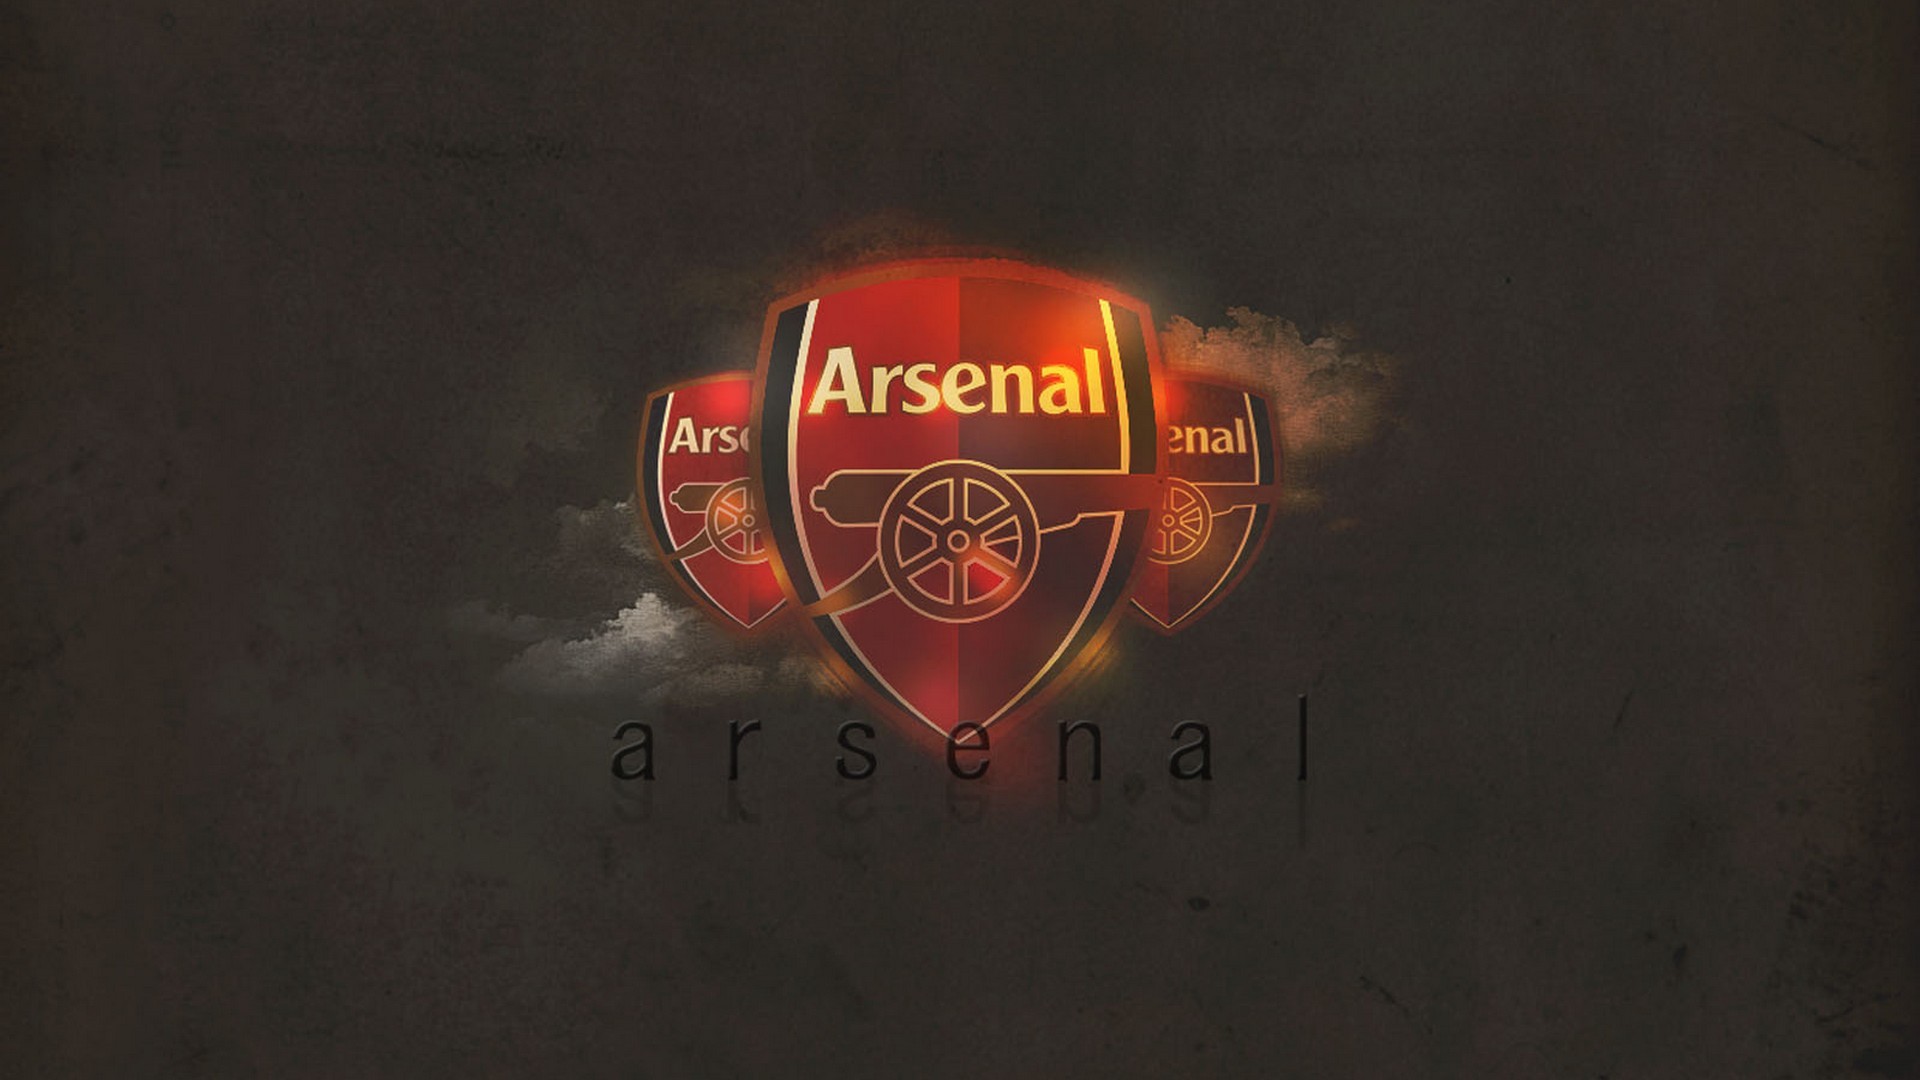 Arsenal FC For PC Wallpaper With Resolution 1920X1080 pixel. You can make this wallpaper for your Mac or Windows Desktop Background, iPhone, Android or Tablet and another Smartphone device for free